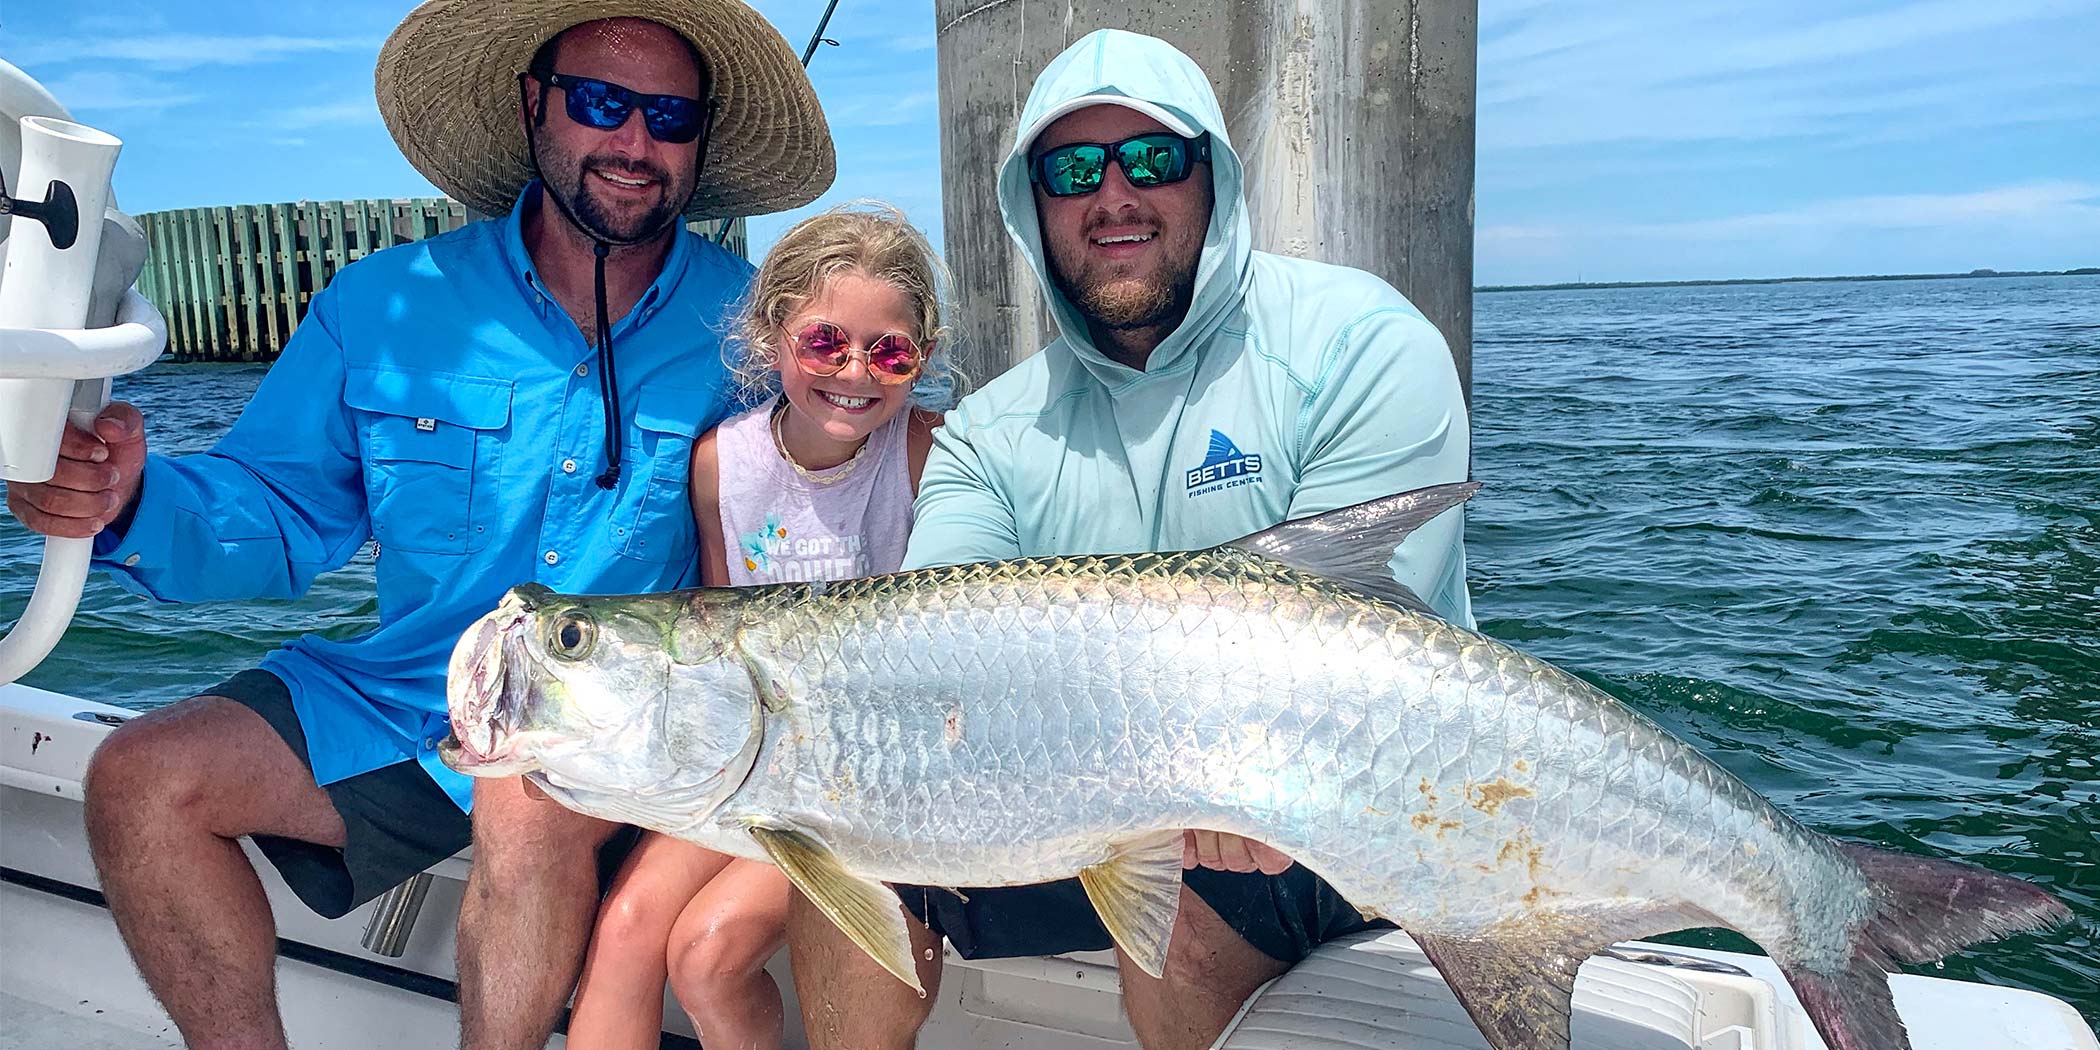 This family had a great time on their inshore charter, which included landing this big tarpon!